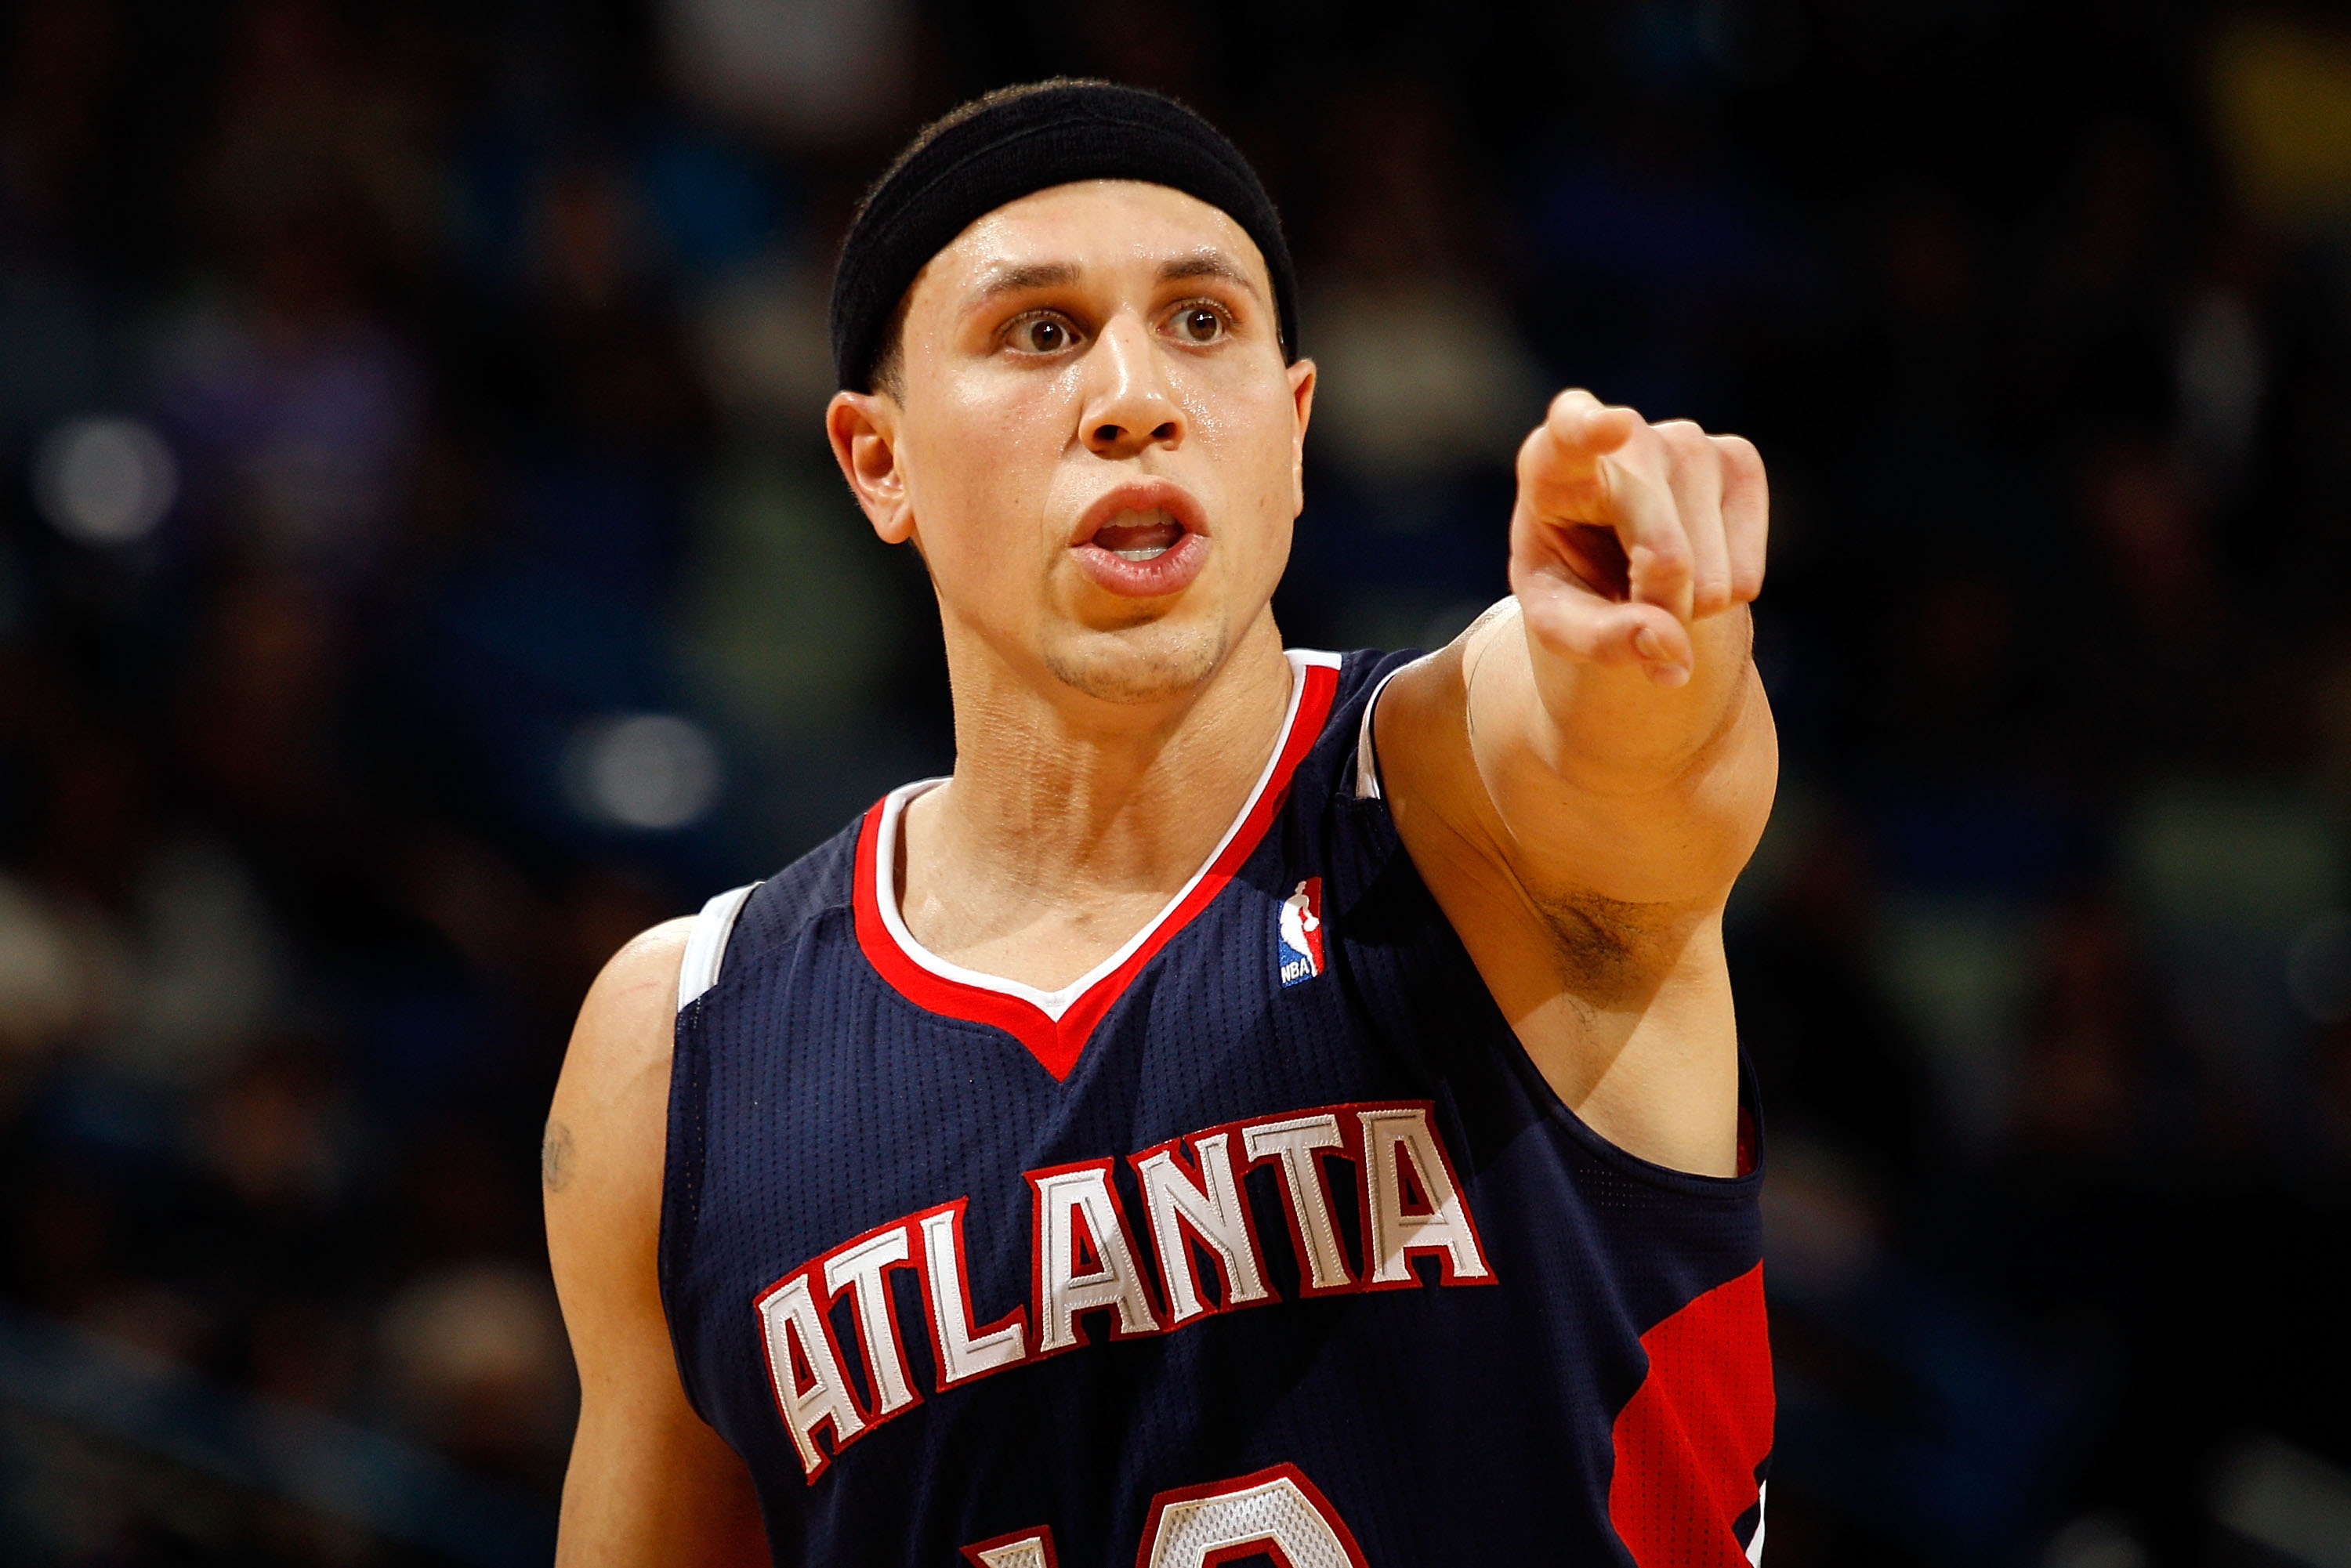 NEW ORLEANS, LA - DECEMBER 26:  Mike Bibby #10 of the Atlanta Hawks calls a play during the game against the New Orleans Hornets at the New Orleans Arena on December 26, 2010 in New Orleans, Louisiana.  The Hornets defeated the Hawks 93-86.  NOTE TO USER: